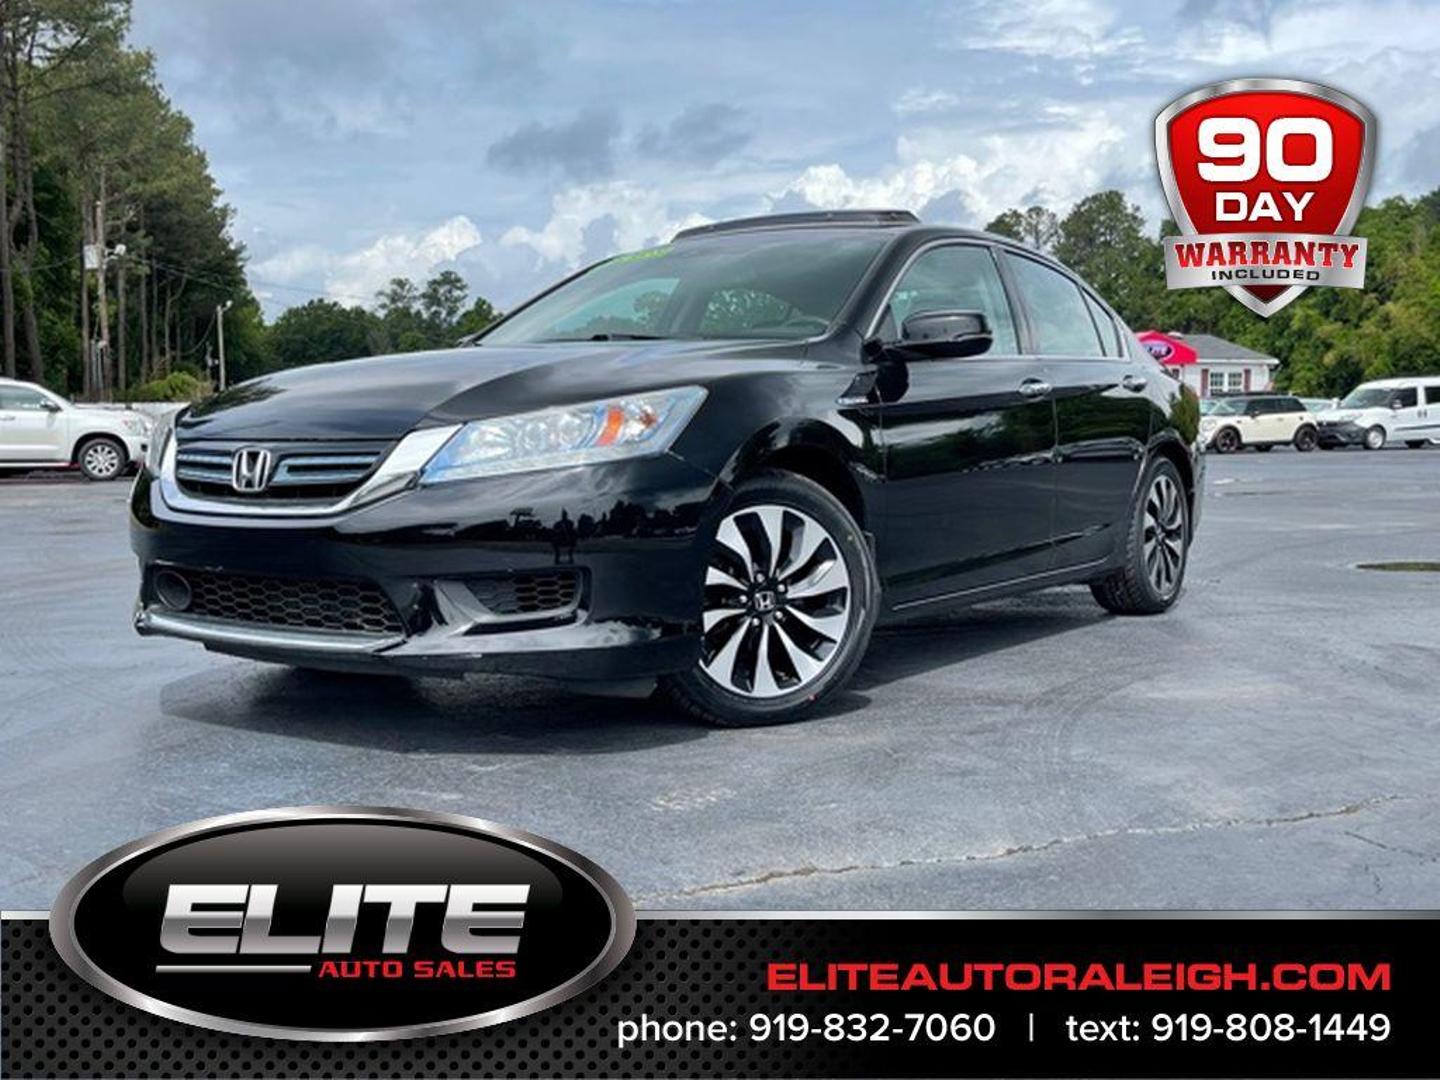 Used Honda Accord Hybrid 2014 For Sale In Raleigh Nc Elite Auto Sales